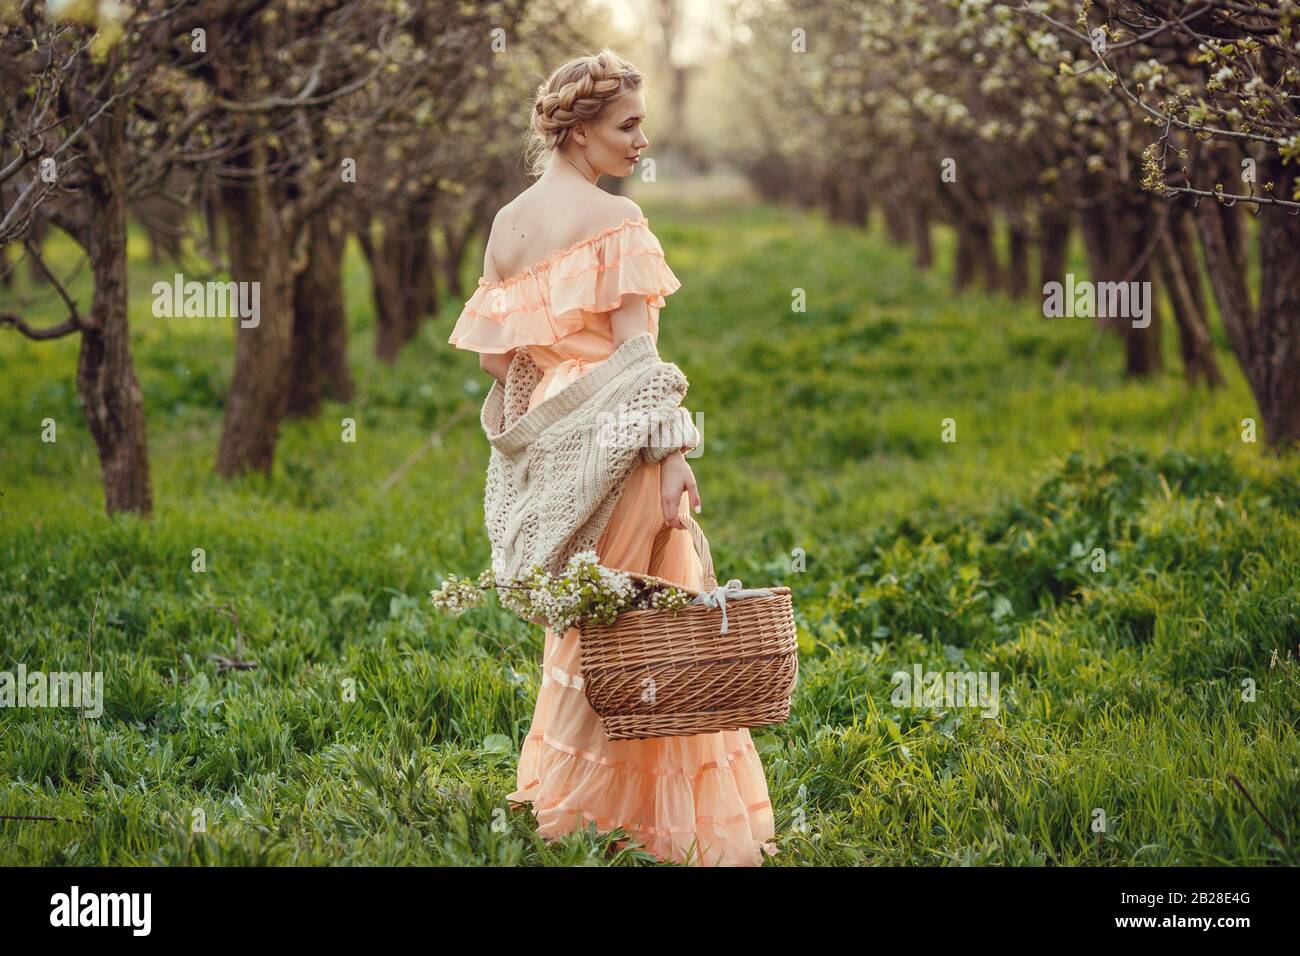 Beautiful young girl in an old dress in a pear-blossoming garden. Beautiful themed photography in retro style Stock Photo